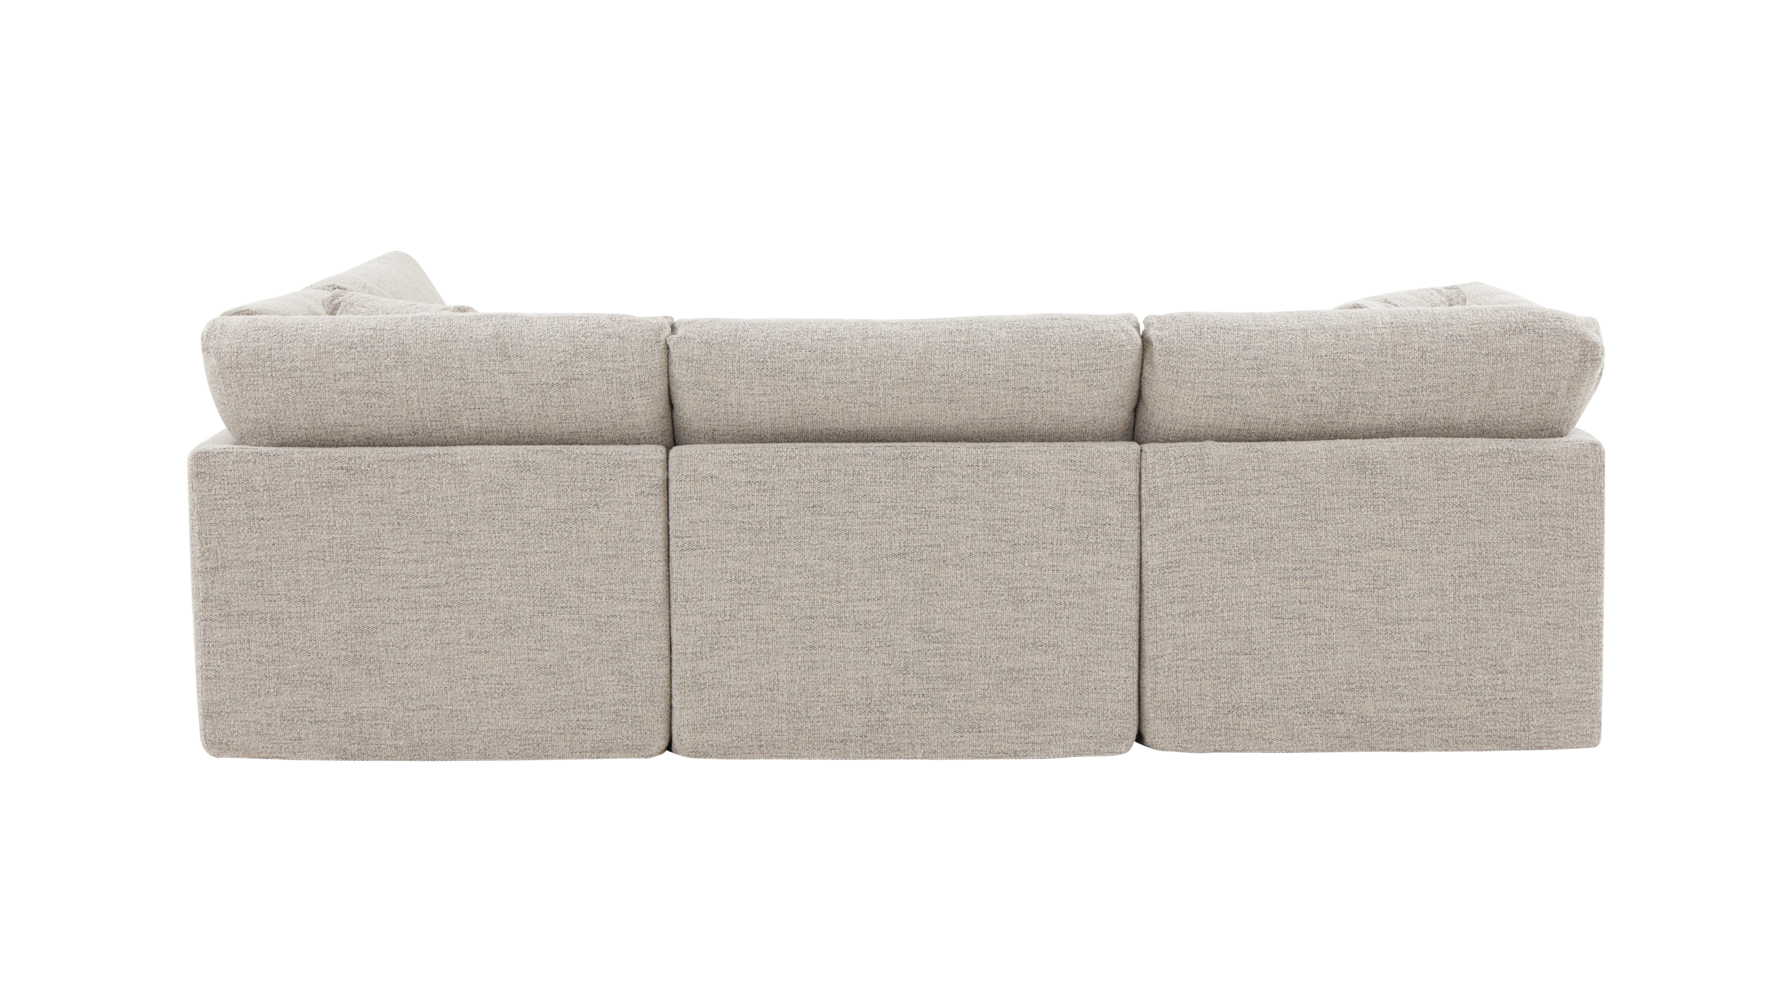 Get Together™ 5-Piece Modular Sectional, Standard, Oatmeal - Image 7